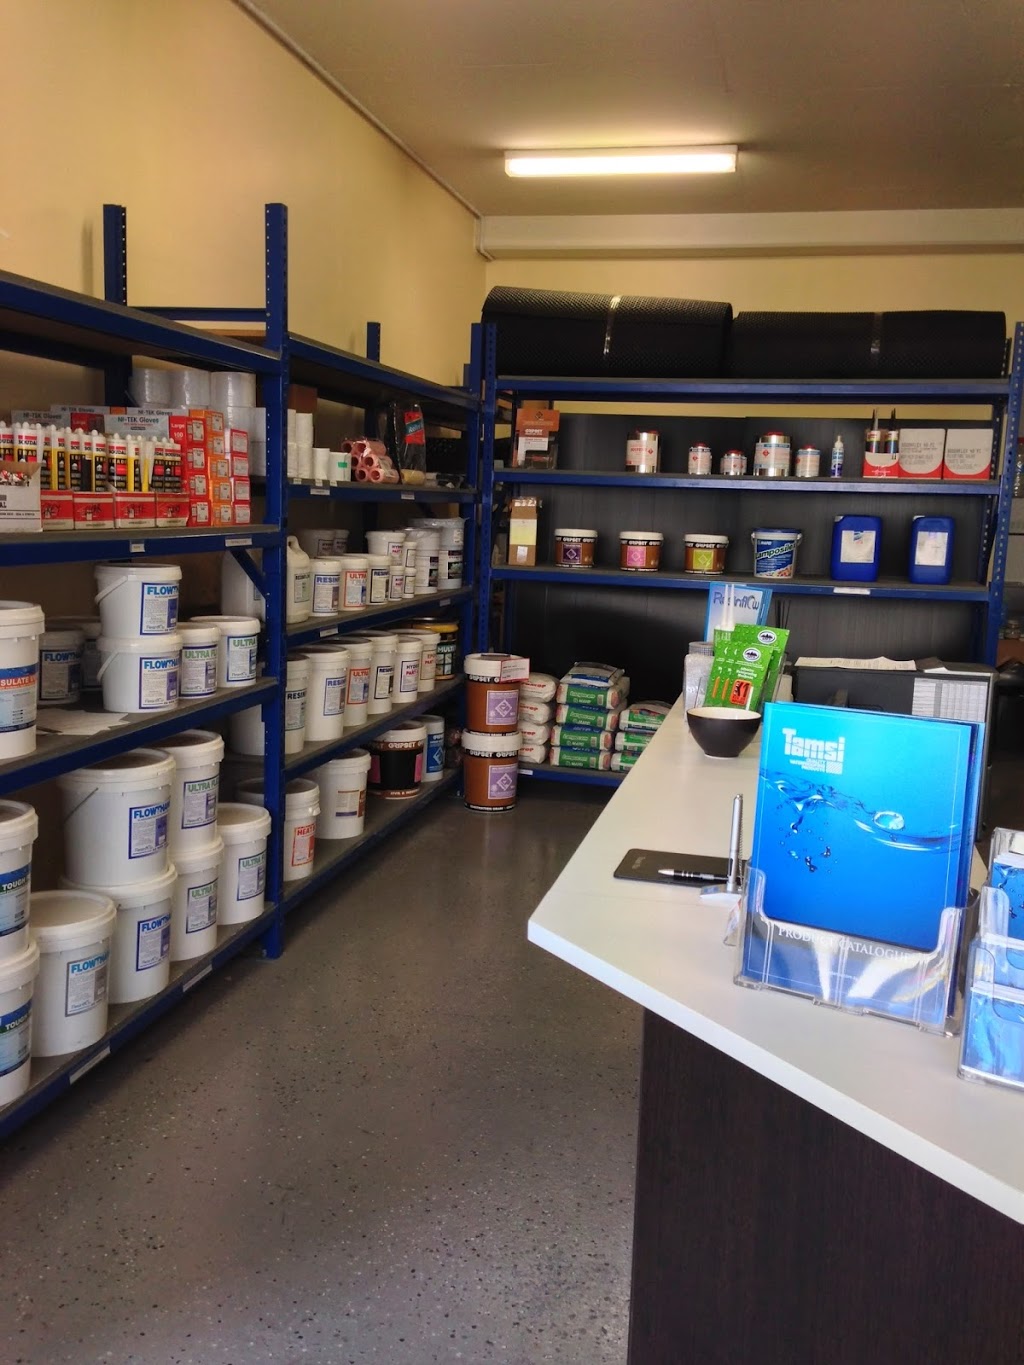 Waterproofing Outlet | store | 8/2A Burrows Rd, St Peters NSW 2044, Australia | 0295502811 OR +61 2 9550 2811